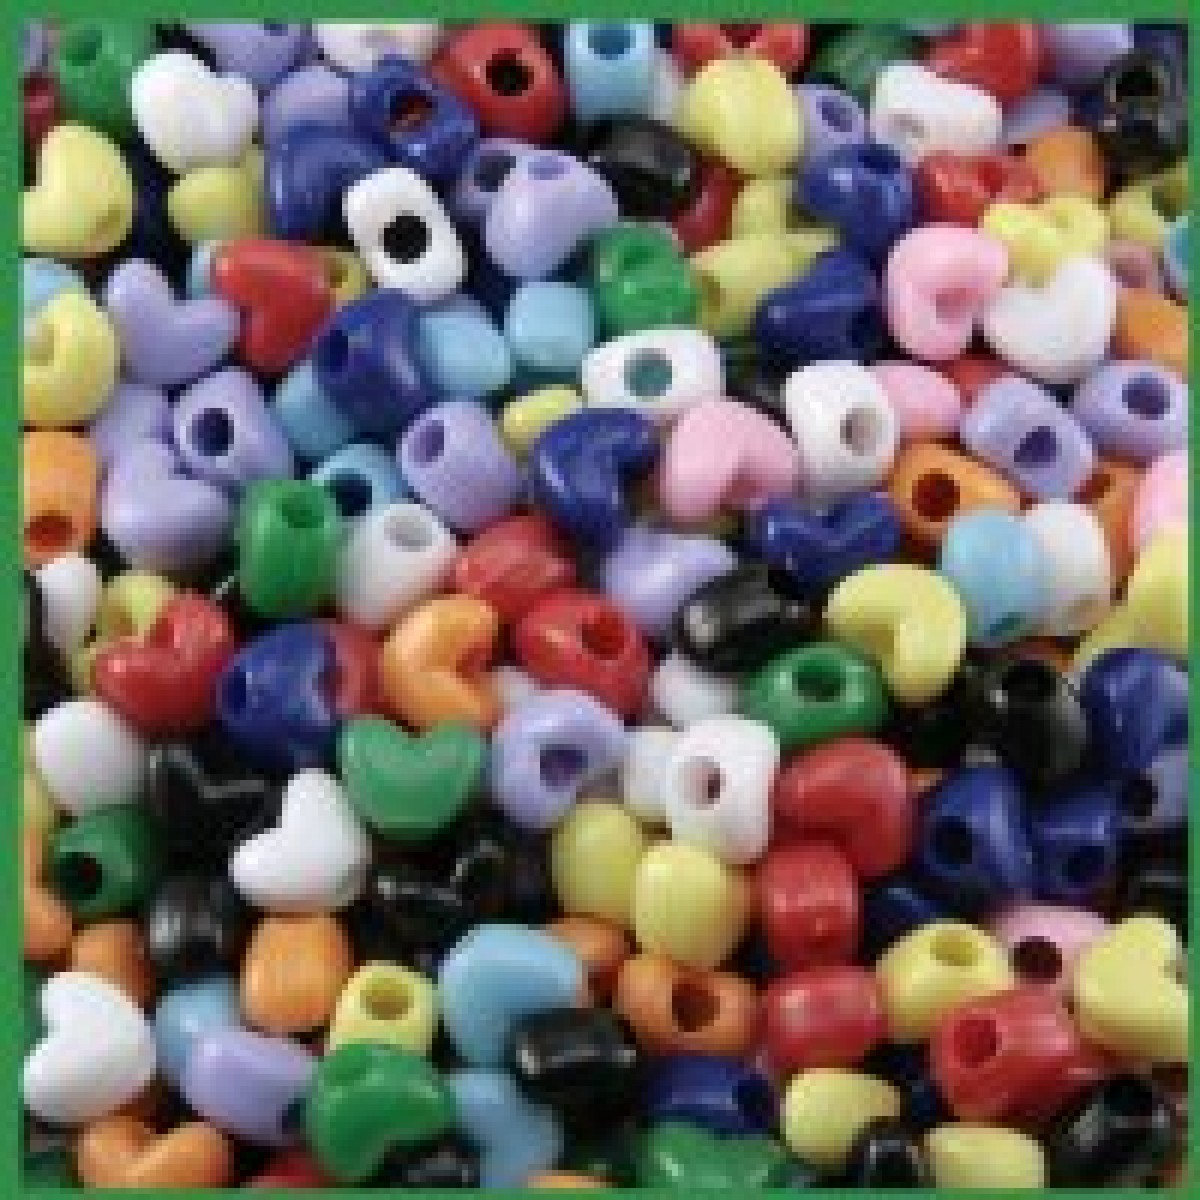 Pony Beads Heart Shape - Beads and Findings - Fun Craft Activities - The  Craft Shop, Inc.